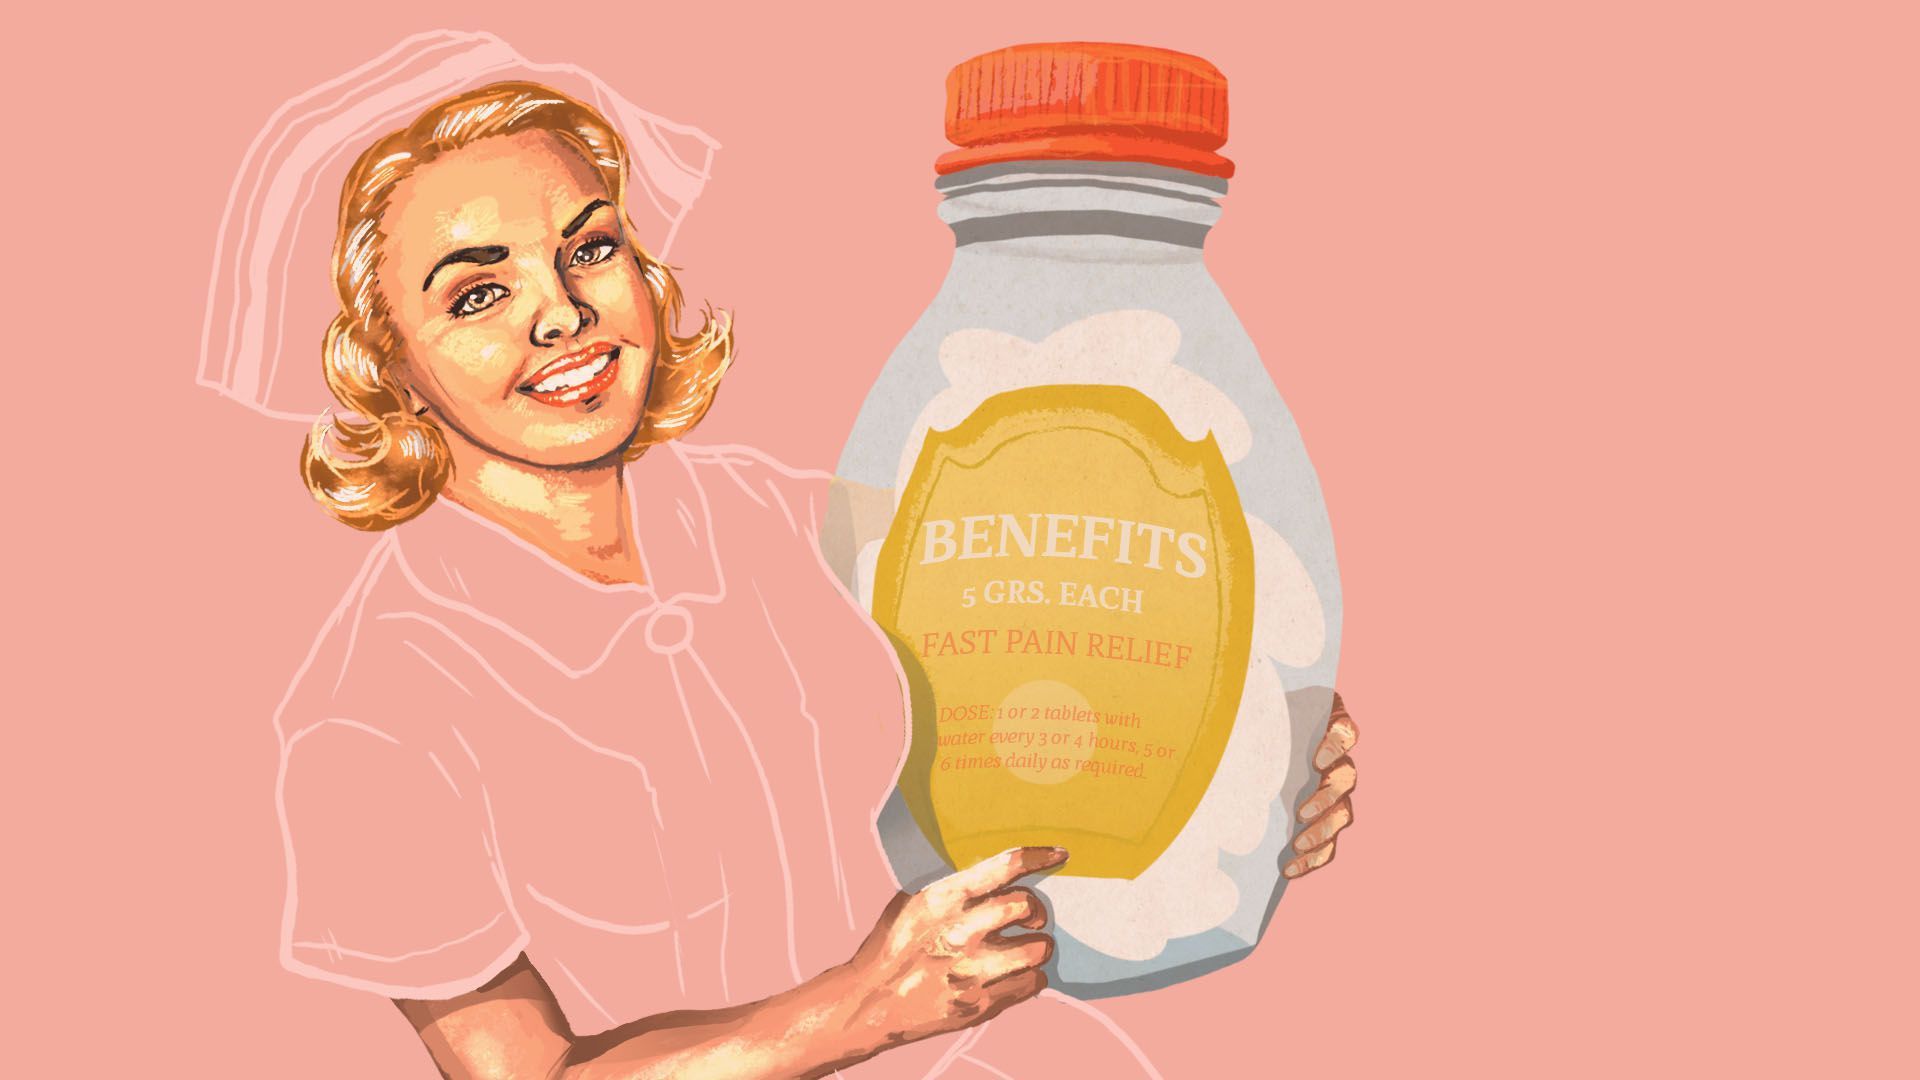 An illustration of a woman holding a giant bottle of "benefits" in the style of a 50s ad